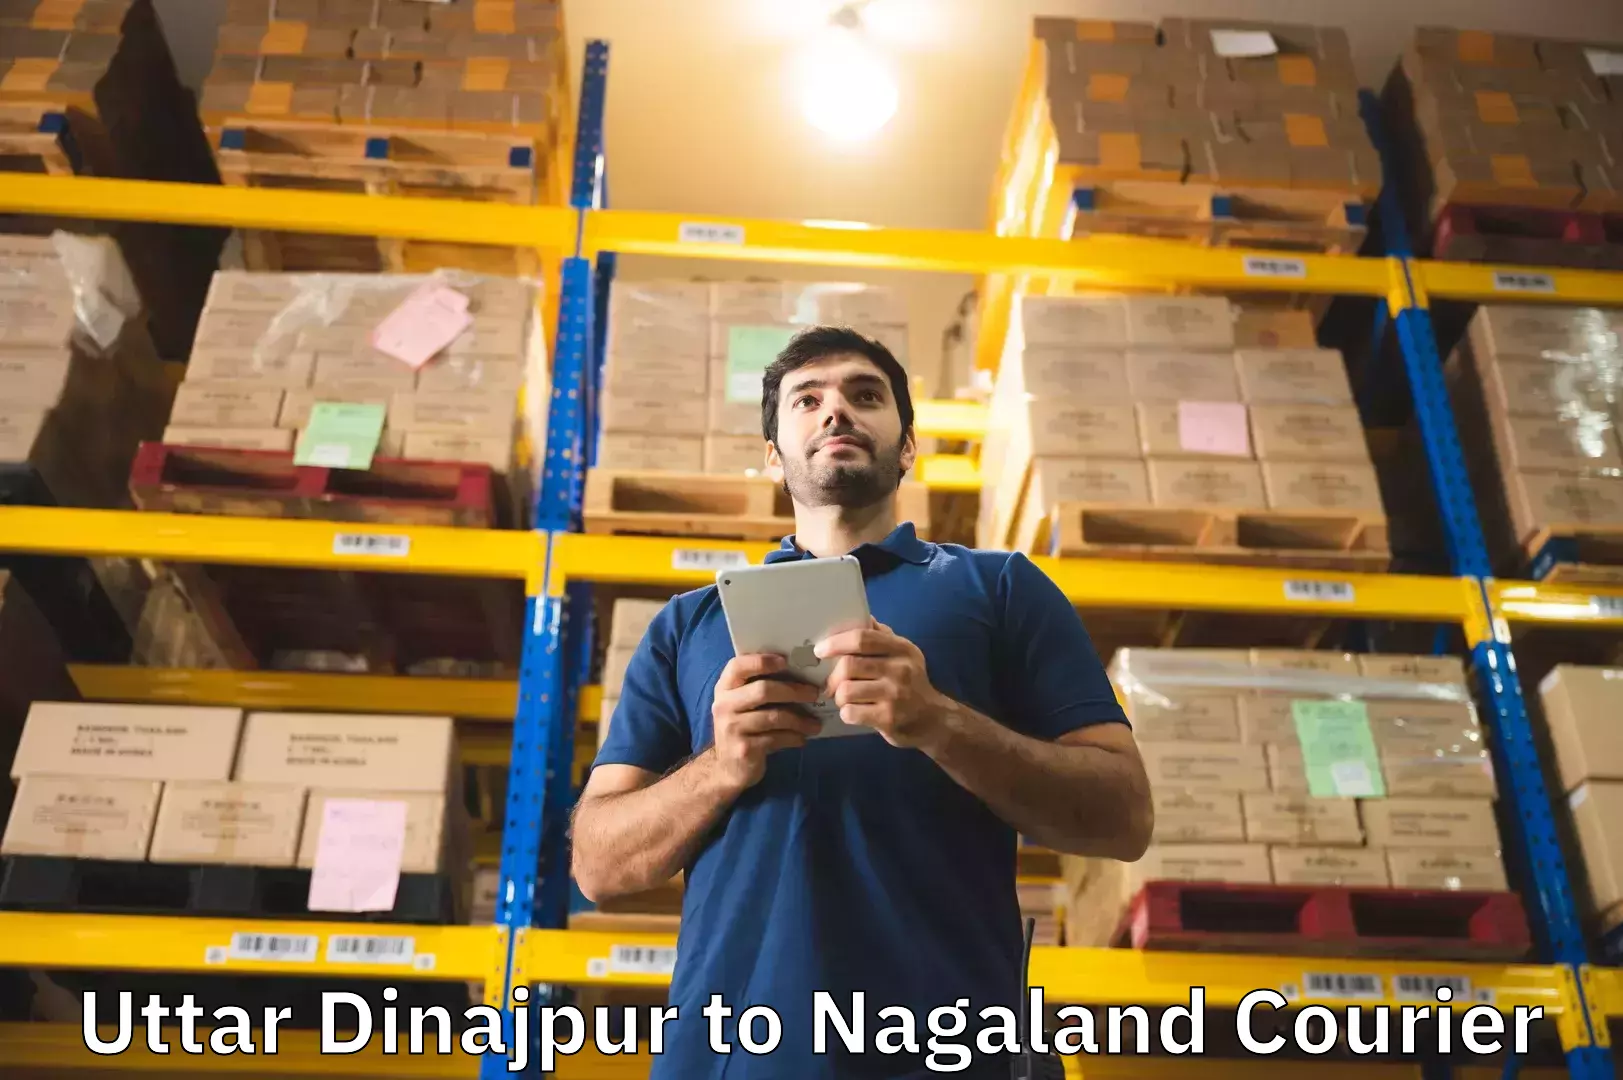 Instant baggage transport quote Uttar Dinajpur to Nagaland